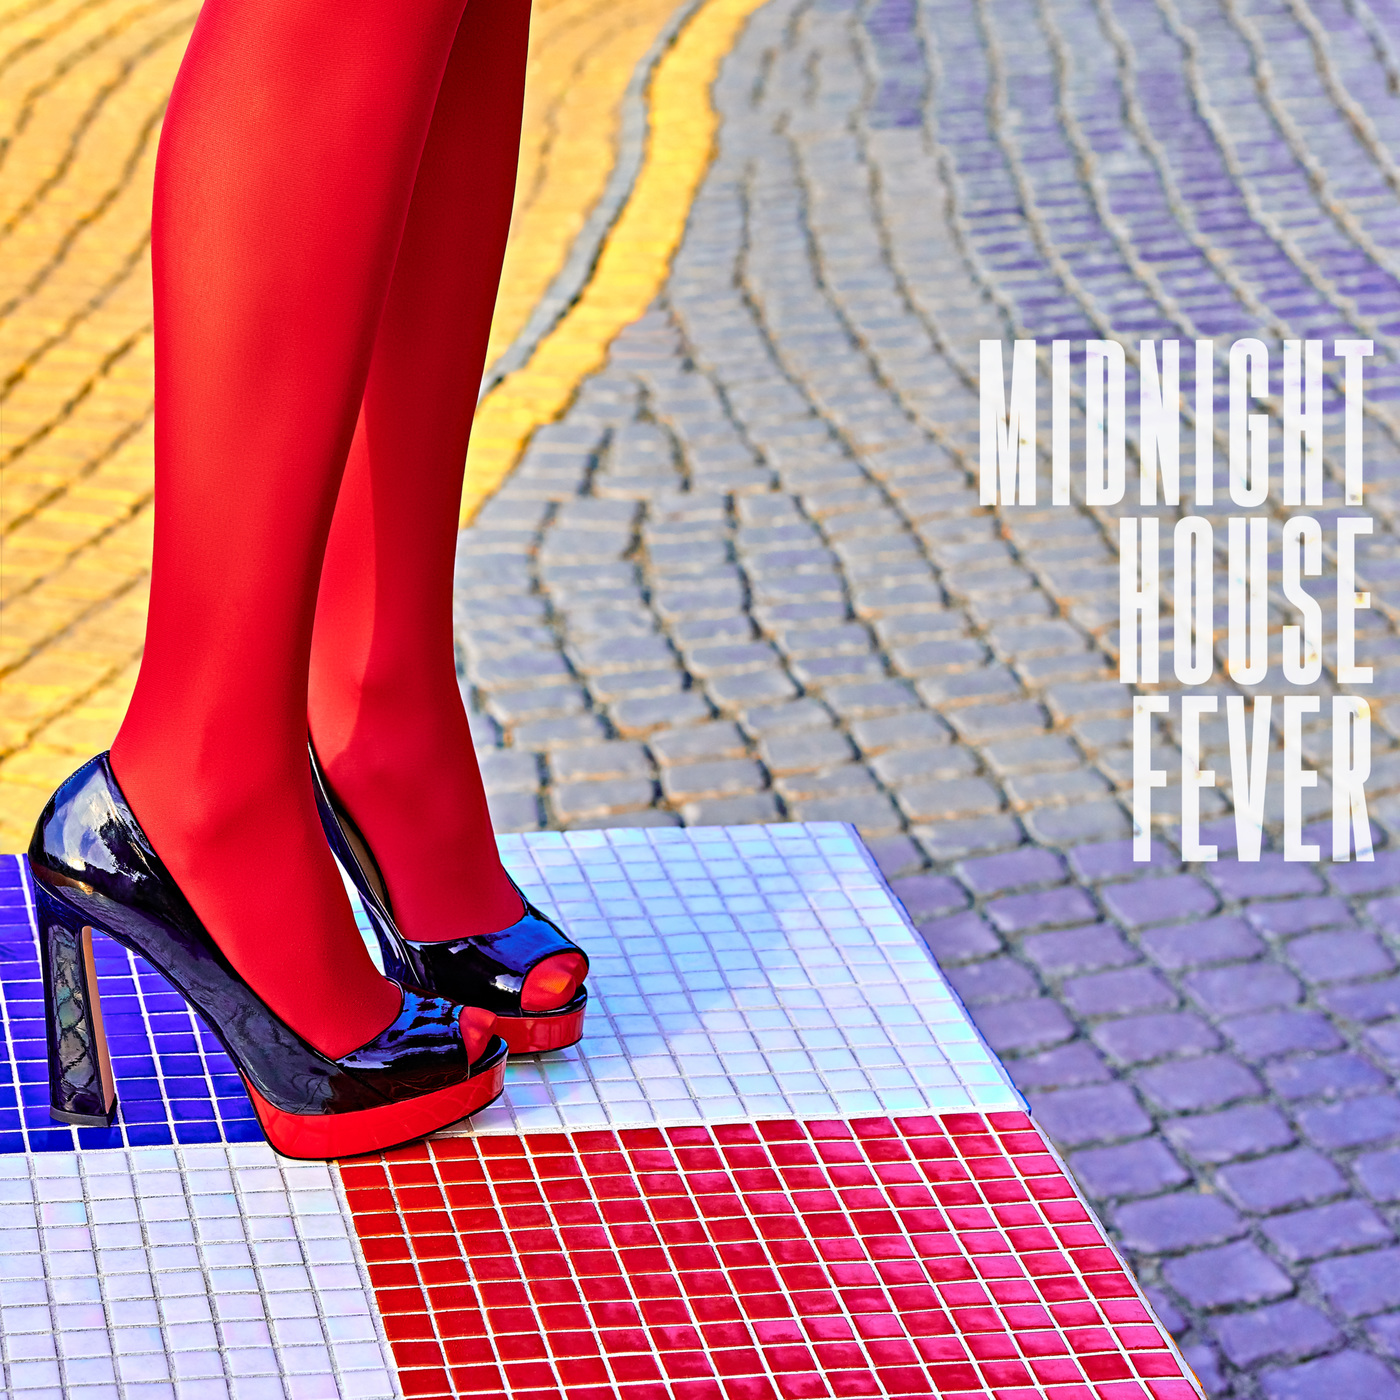 VA - Midnight House Fever / House Pacific Records